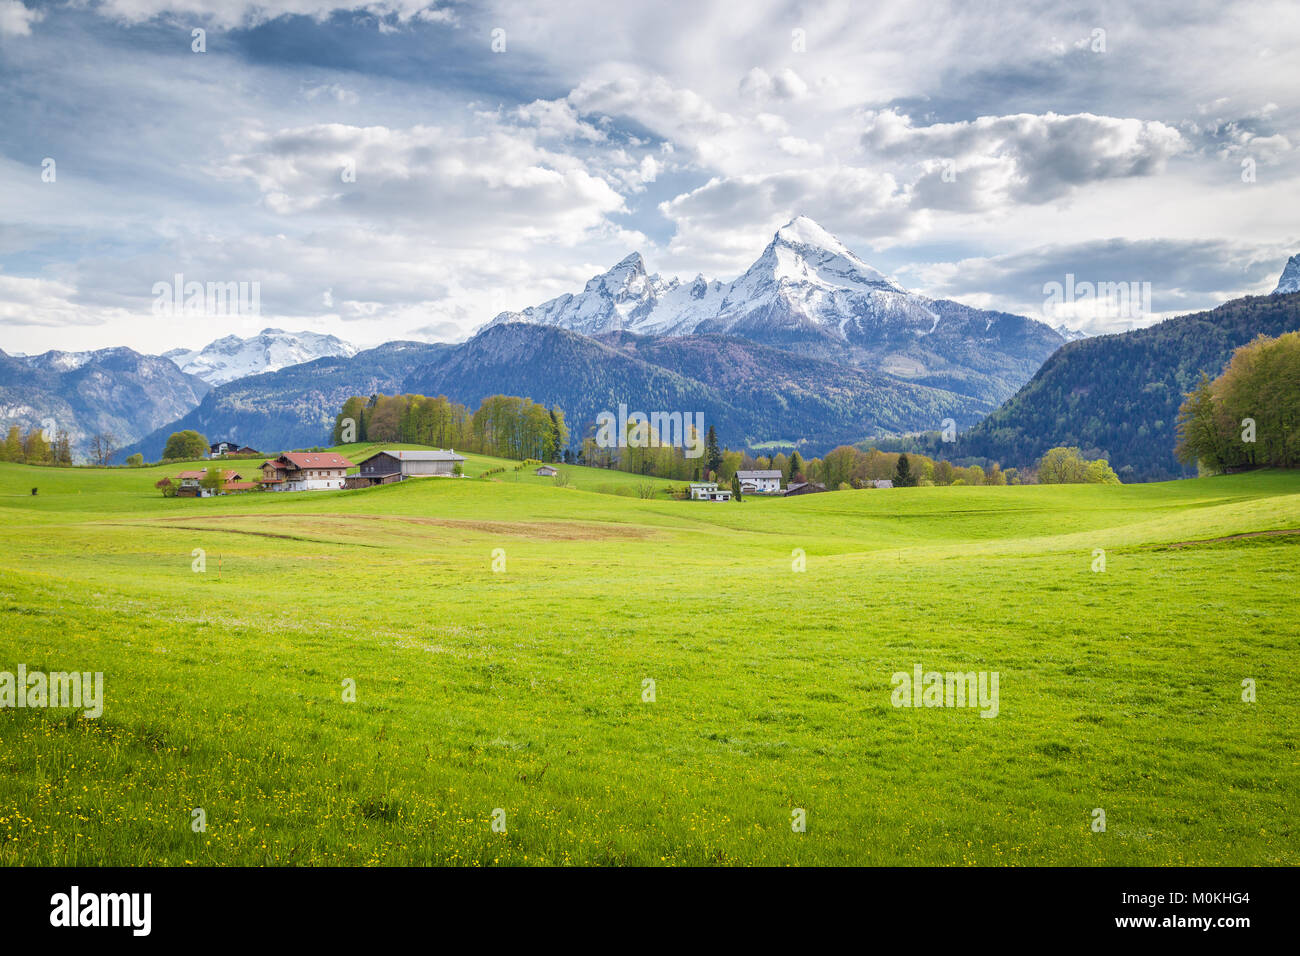 Idyllic mountain scenery in the Alps with blooming meadows in springtime Stock Photo